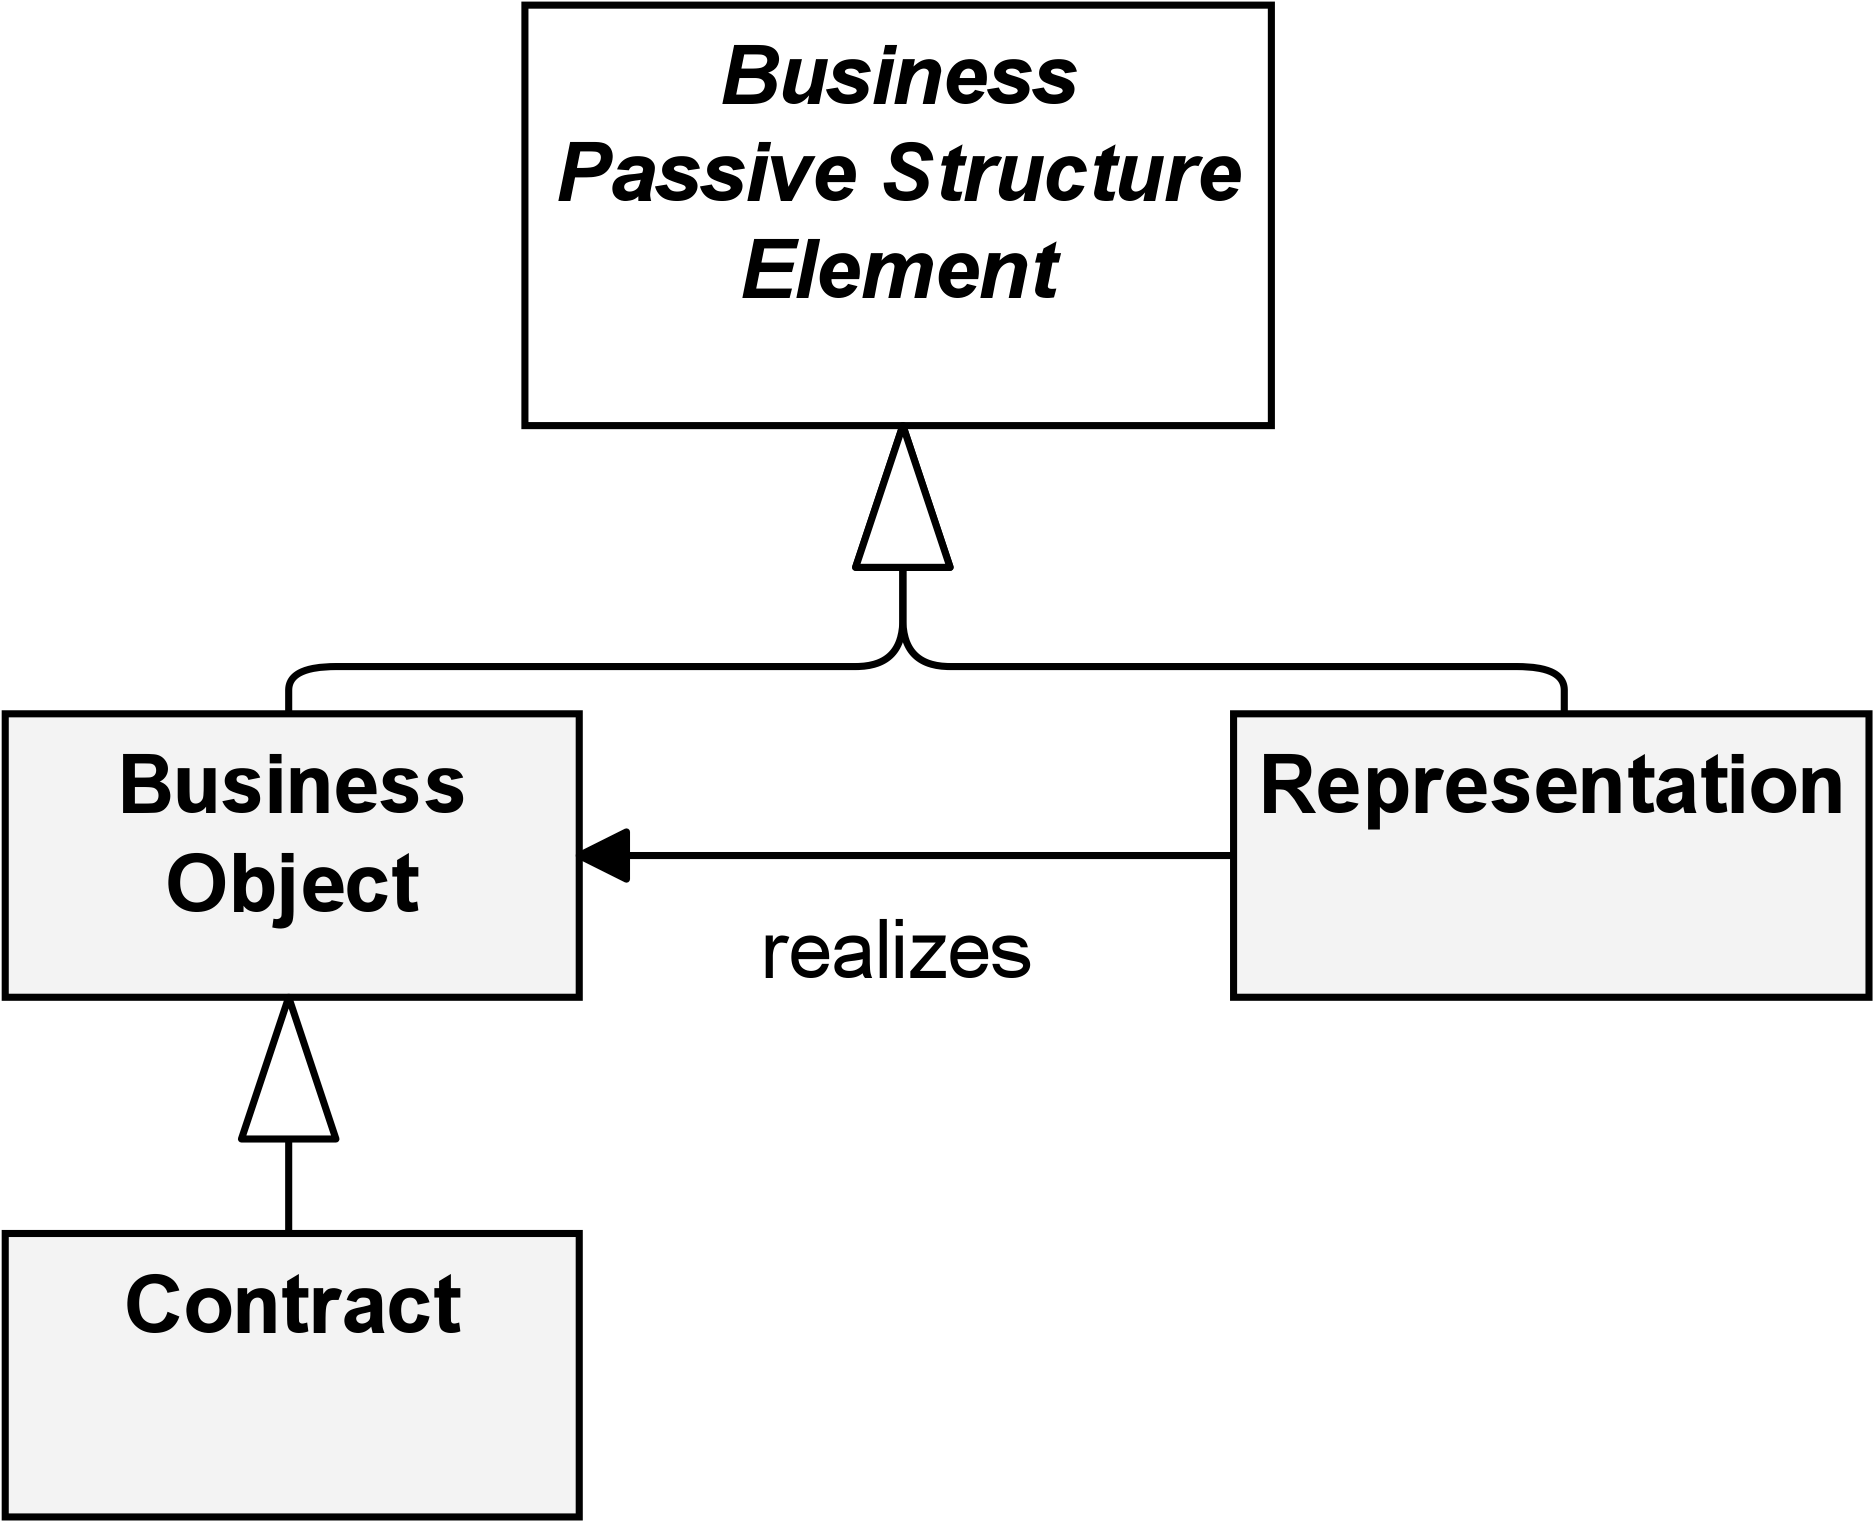 fig Business Passive Structure Elements